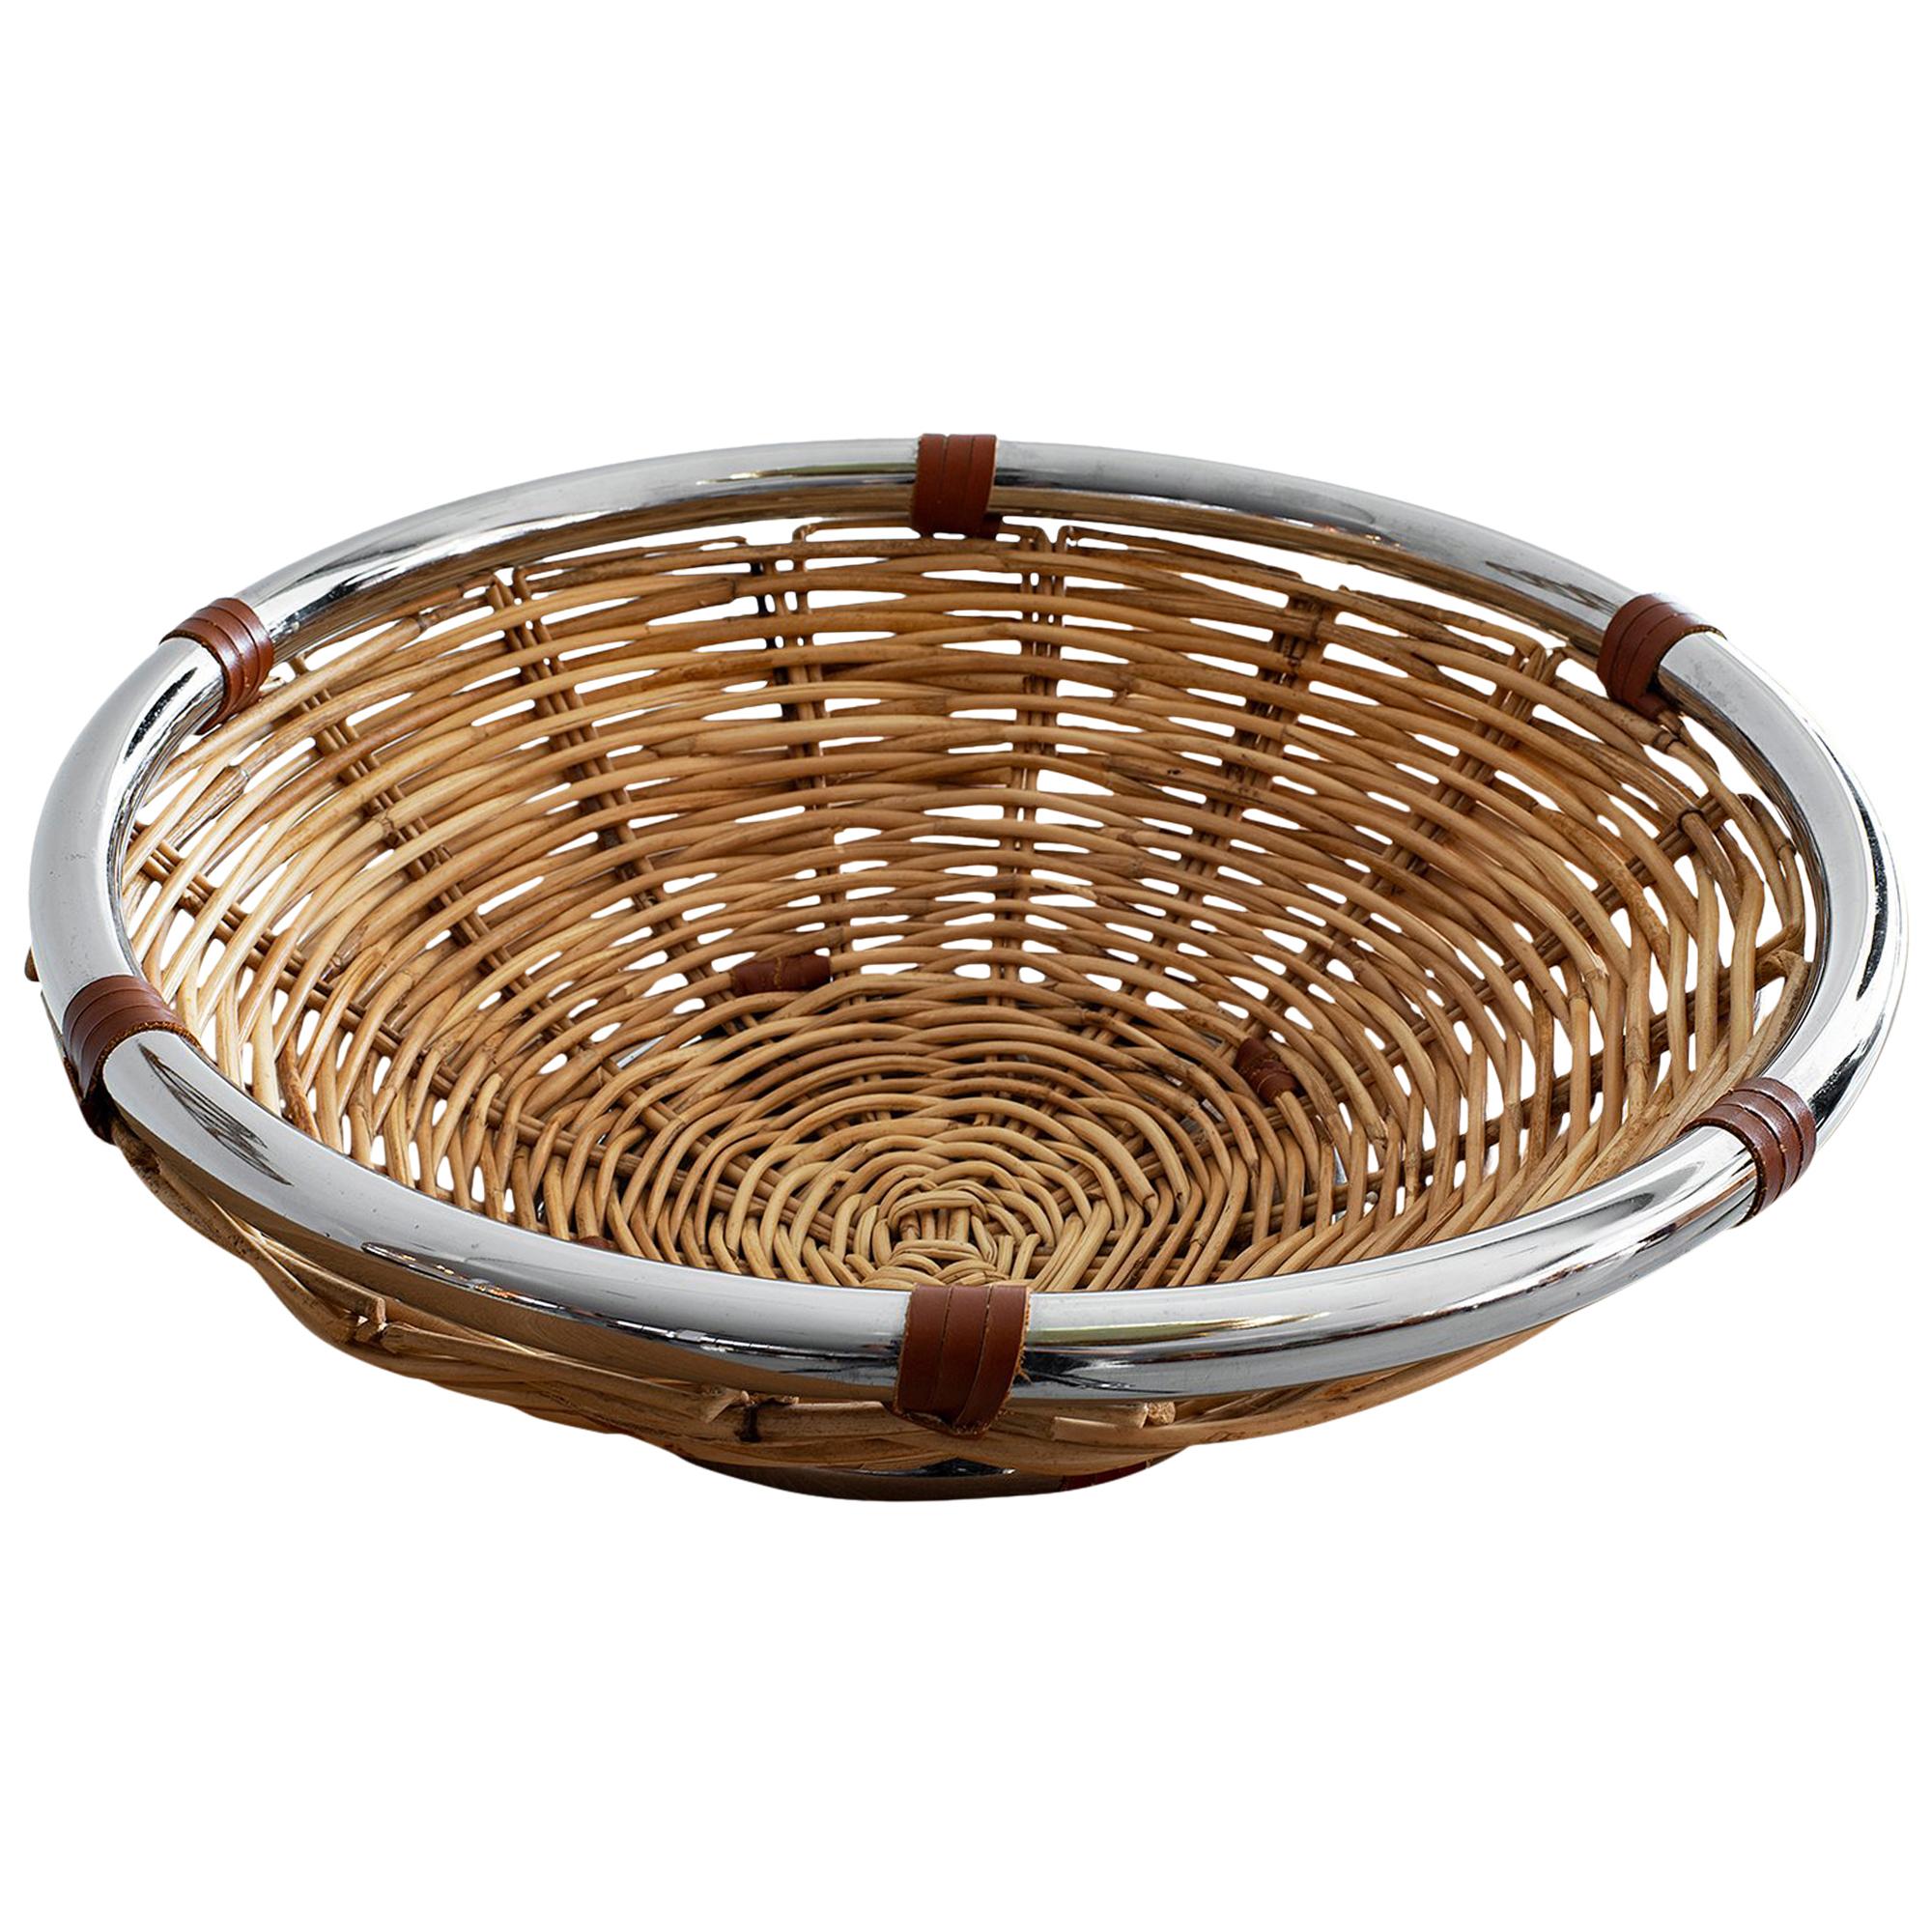 Wicker and Leather Bowl